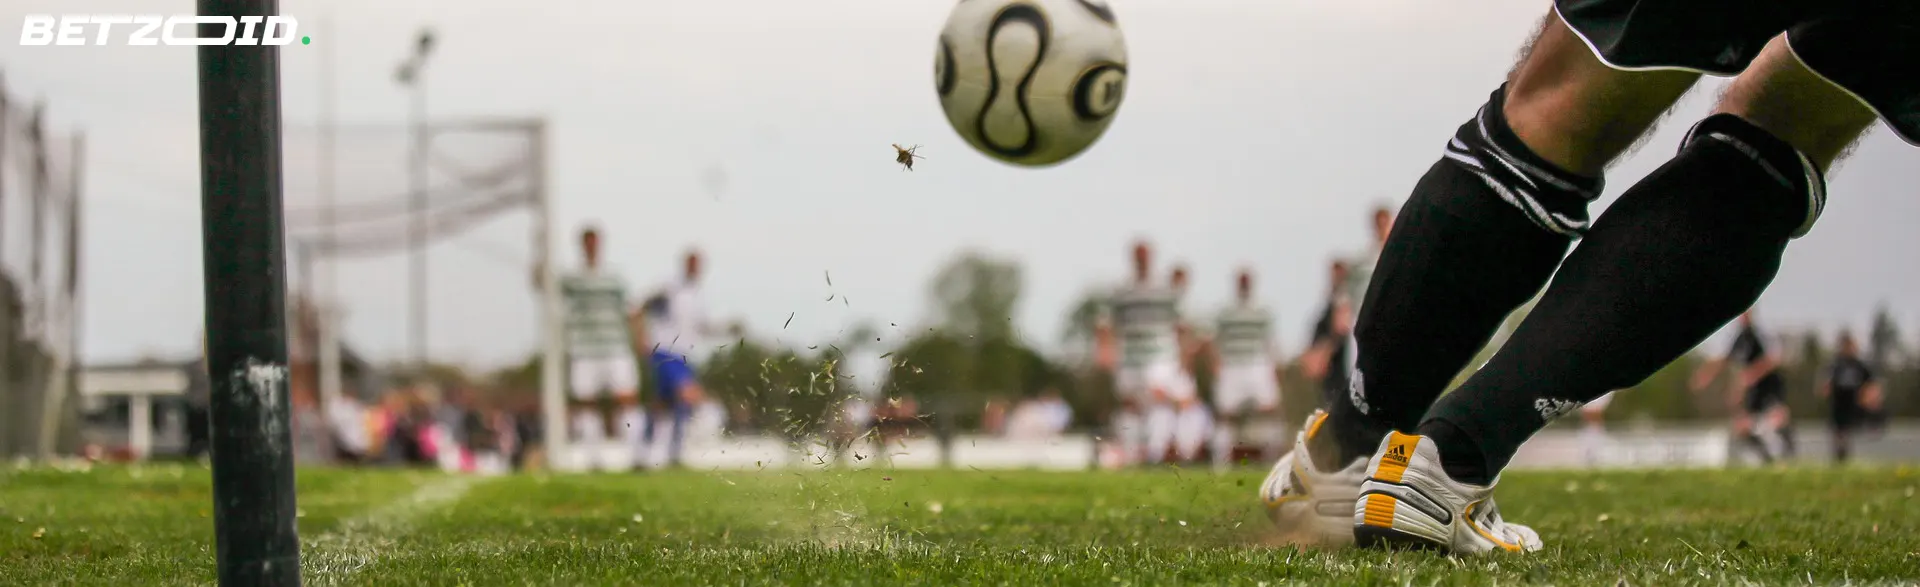 Soccer player kicking a ball on a grass field, highlighting online bookie with cash-out feature for soccer bets.